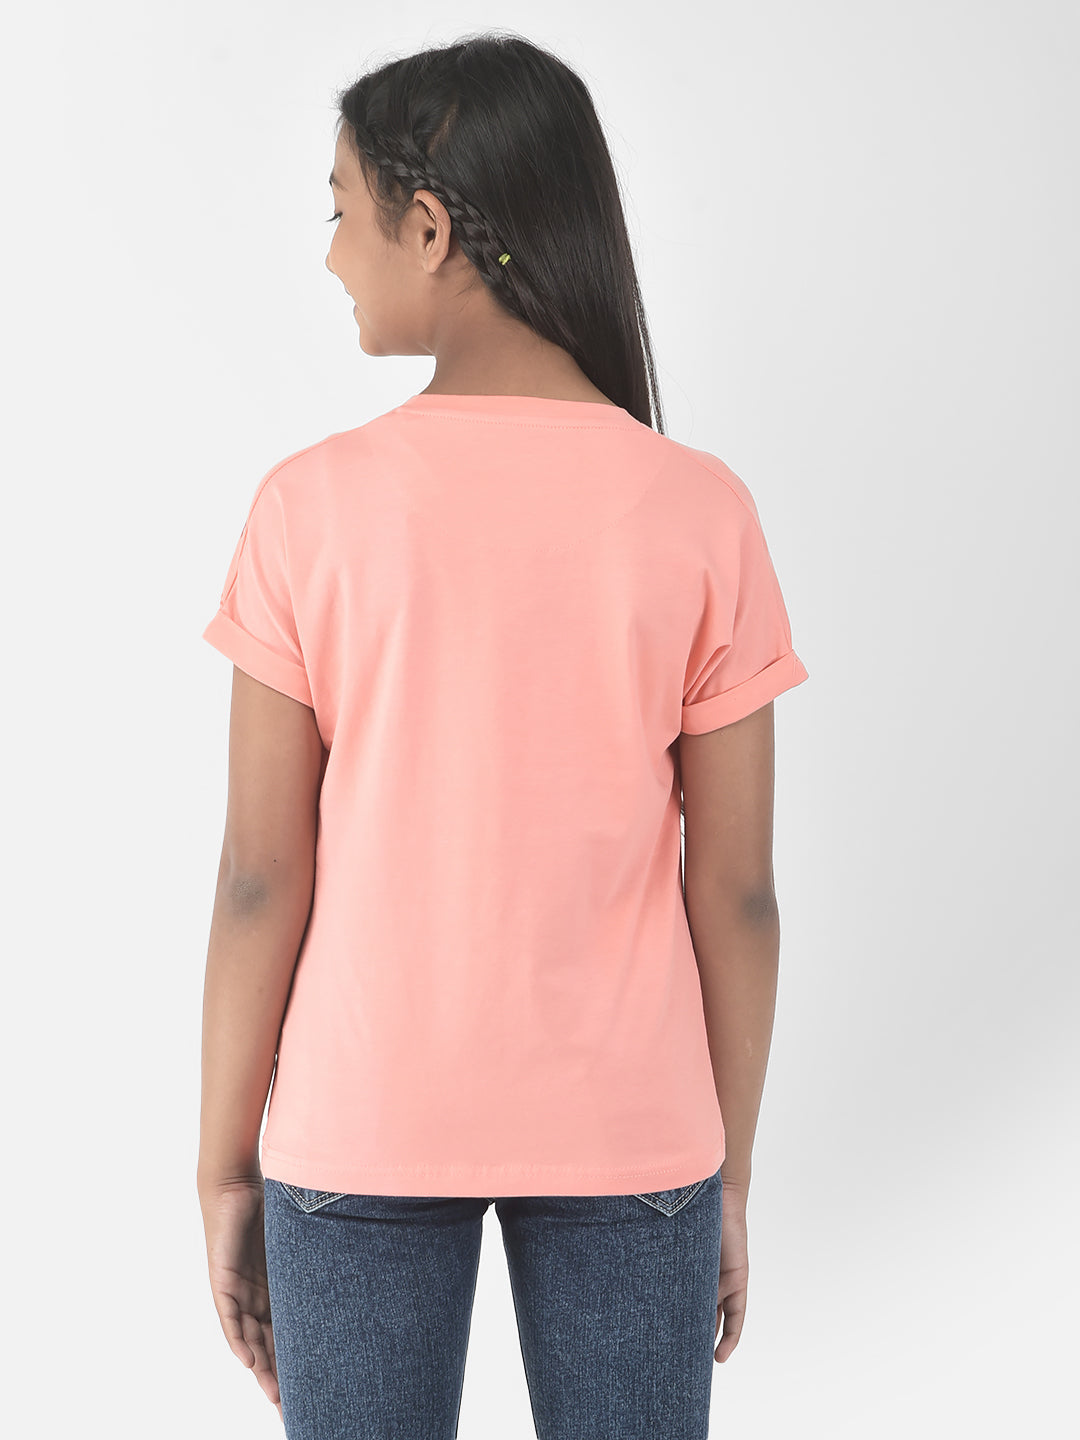  Coral Intense Typographic T-Shirt